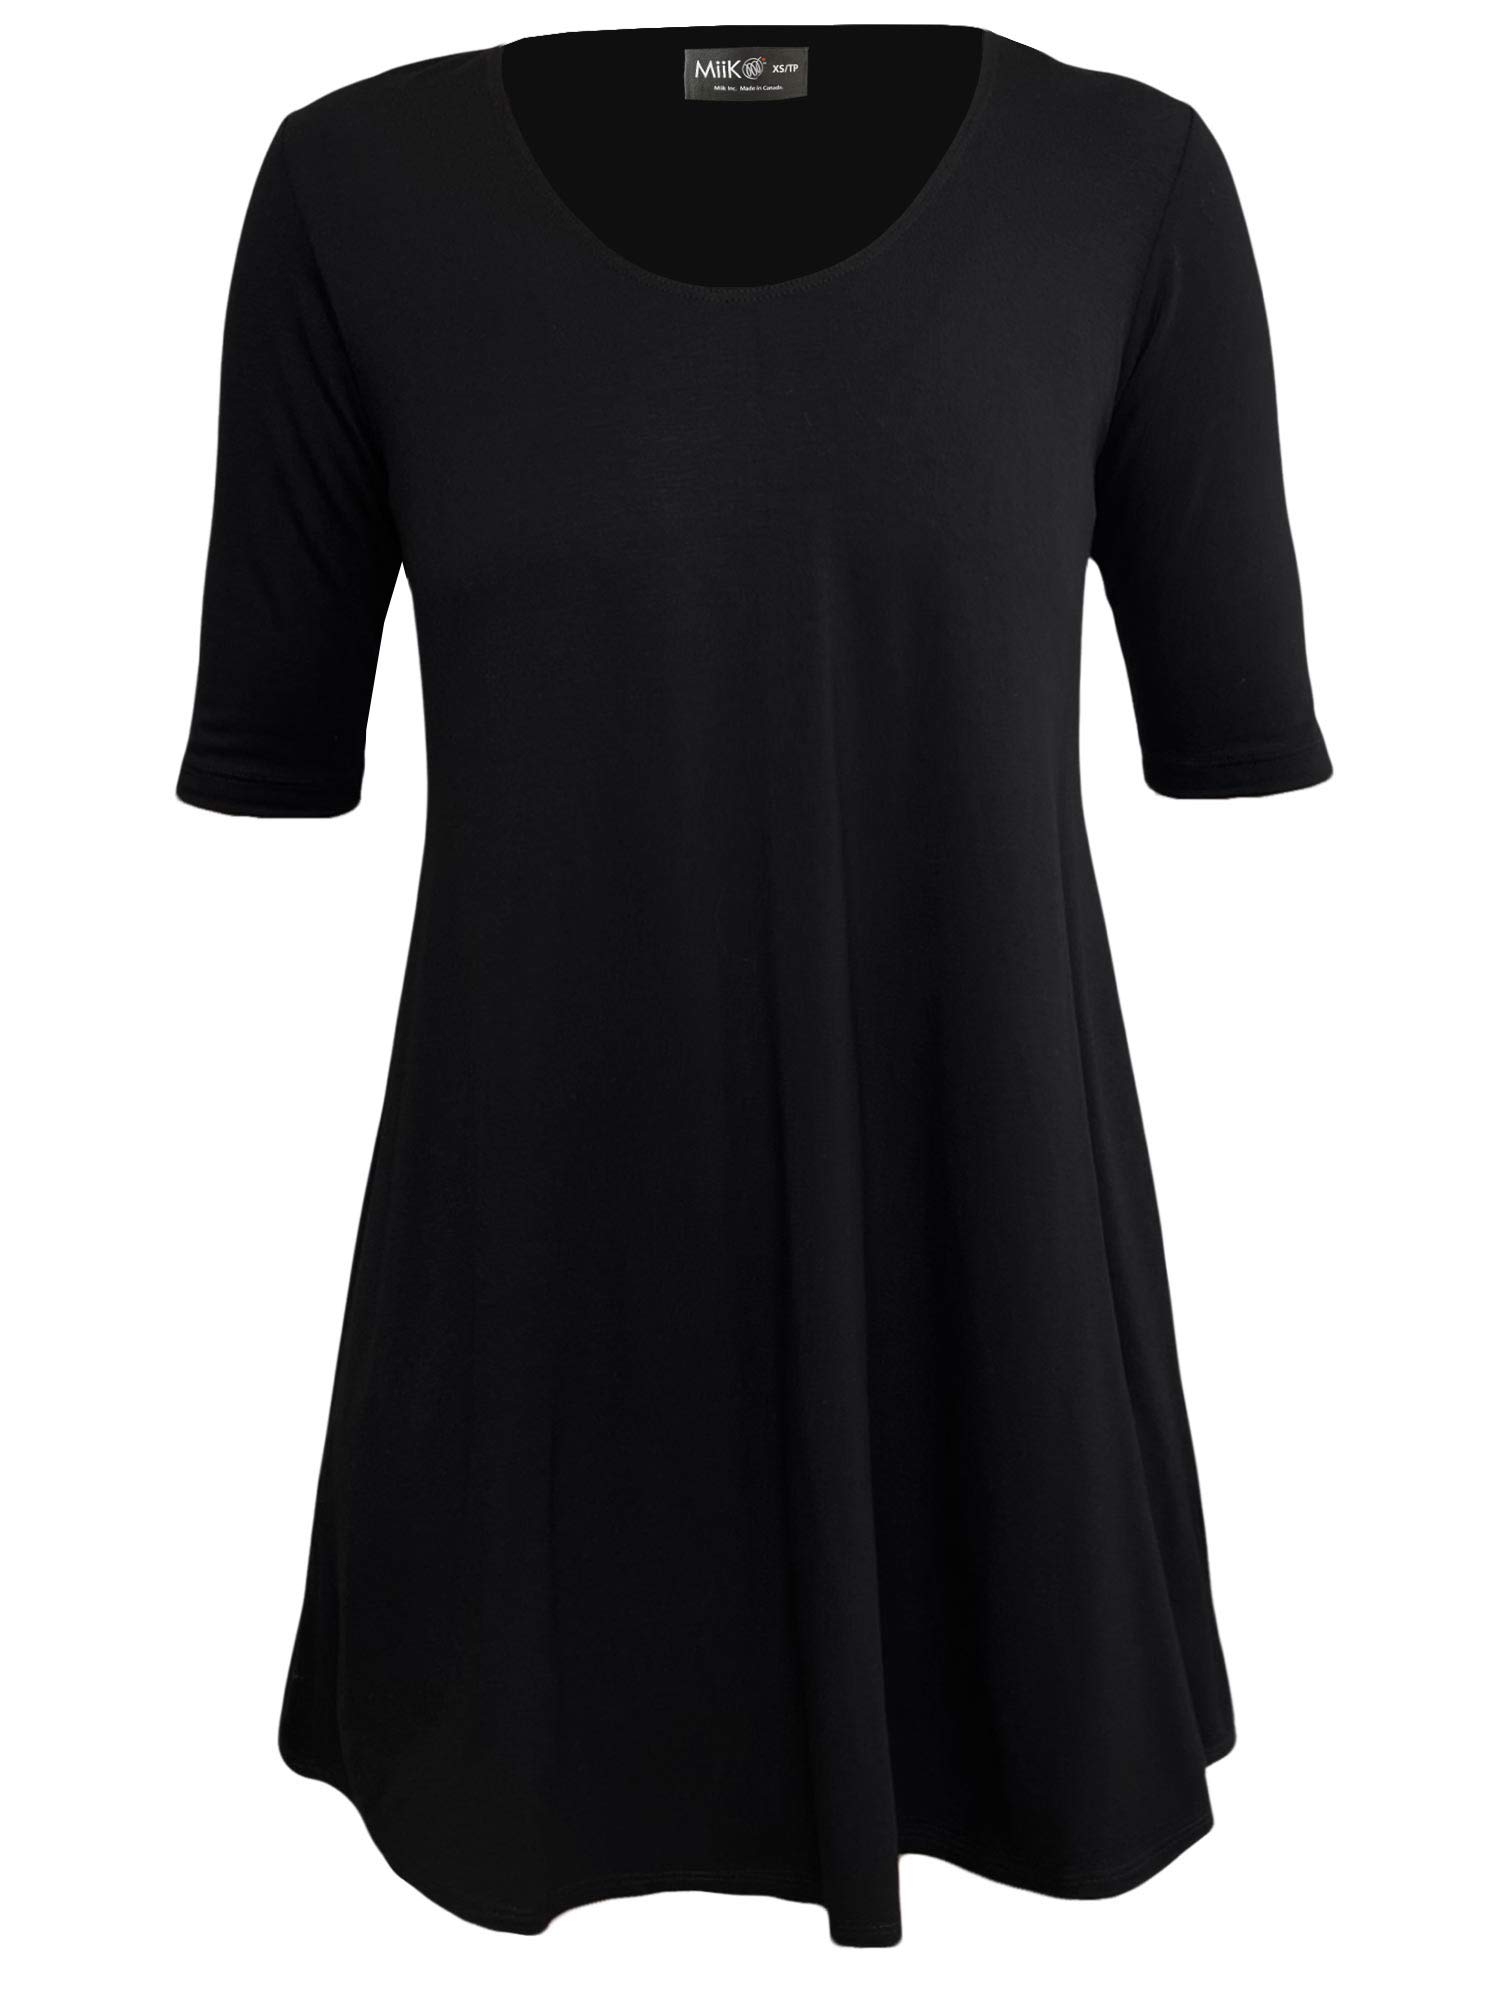 Nellie Style Tunic Top for Healthcare Professionals